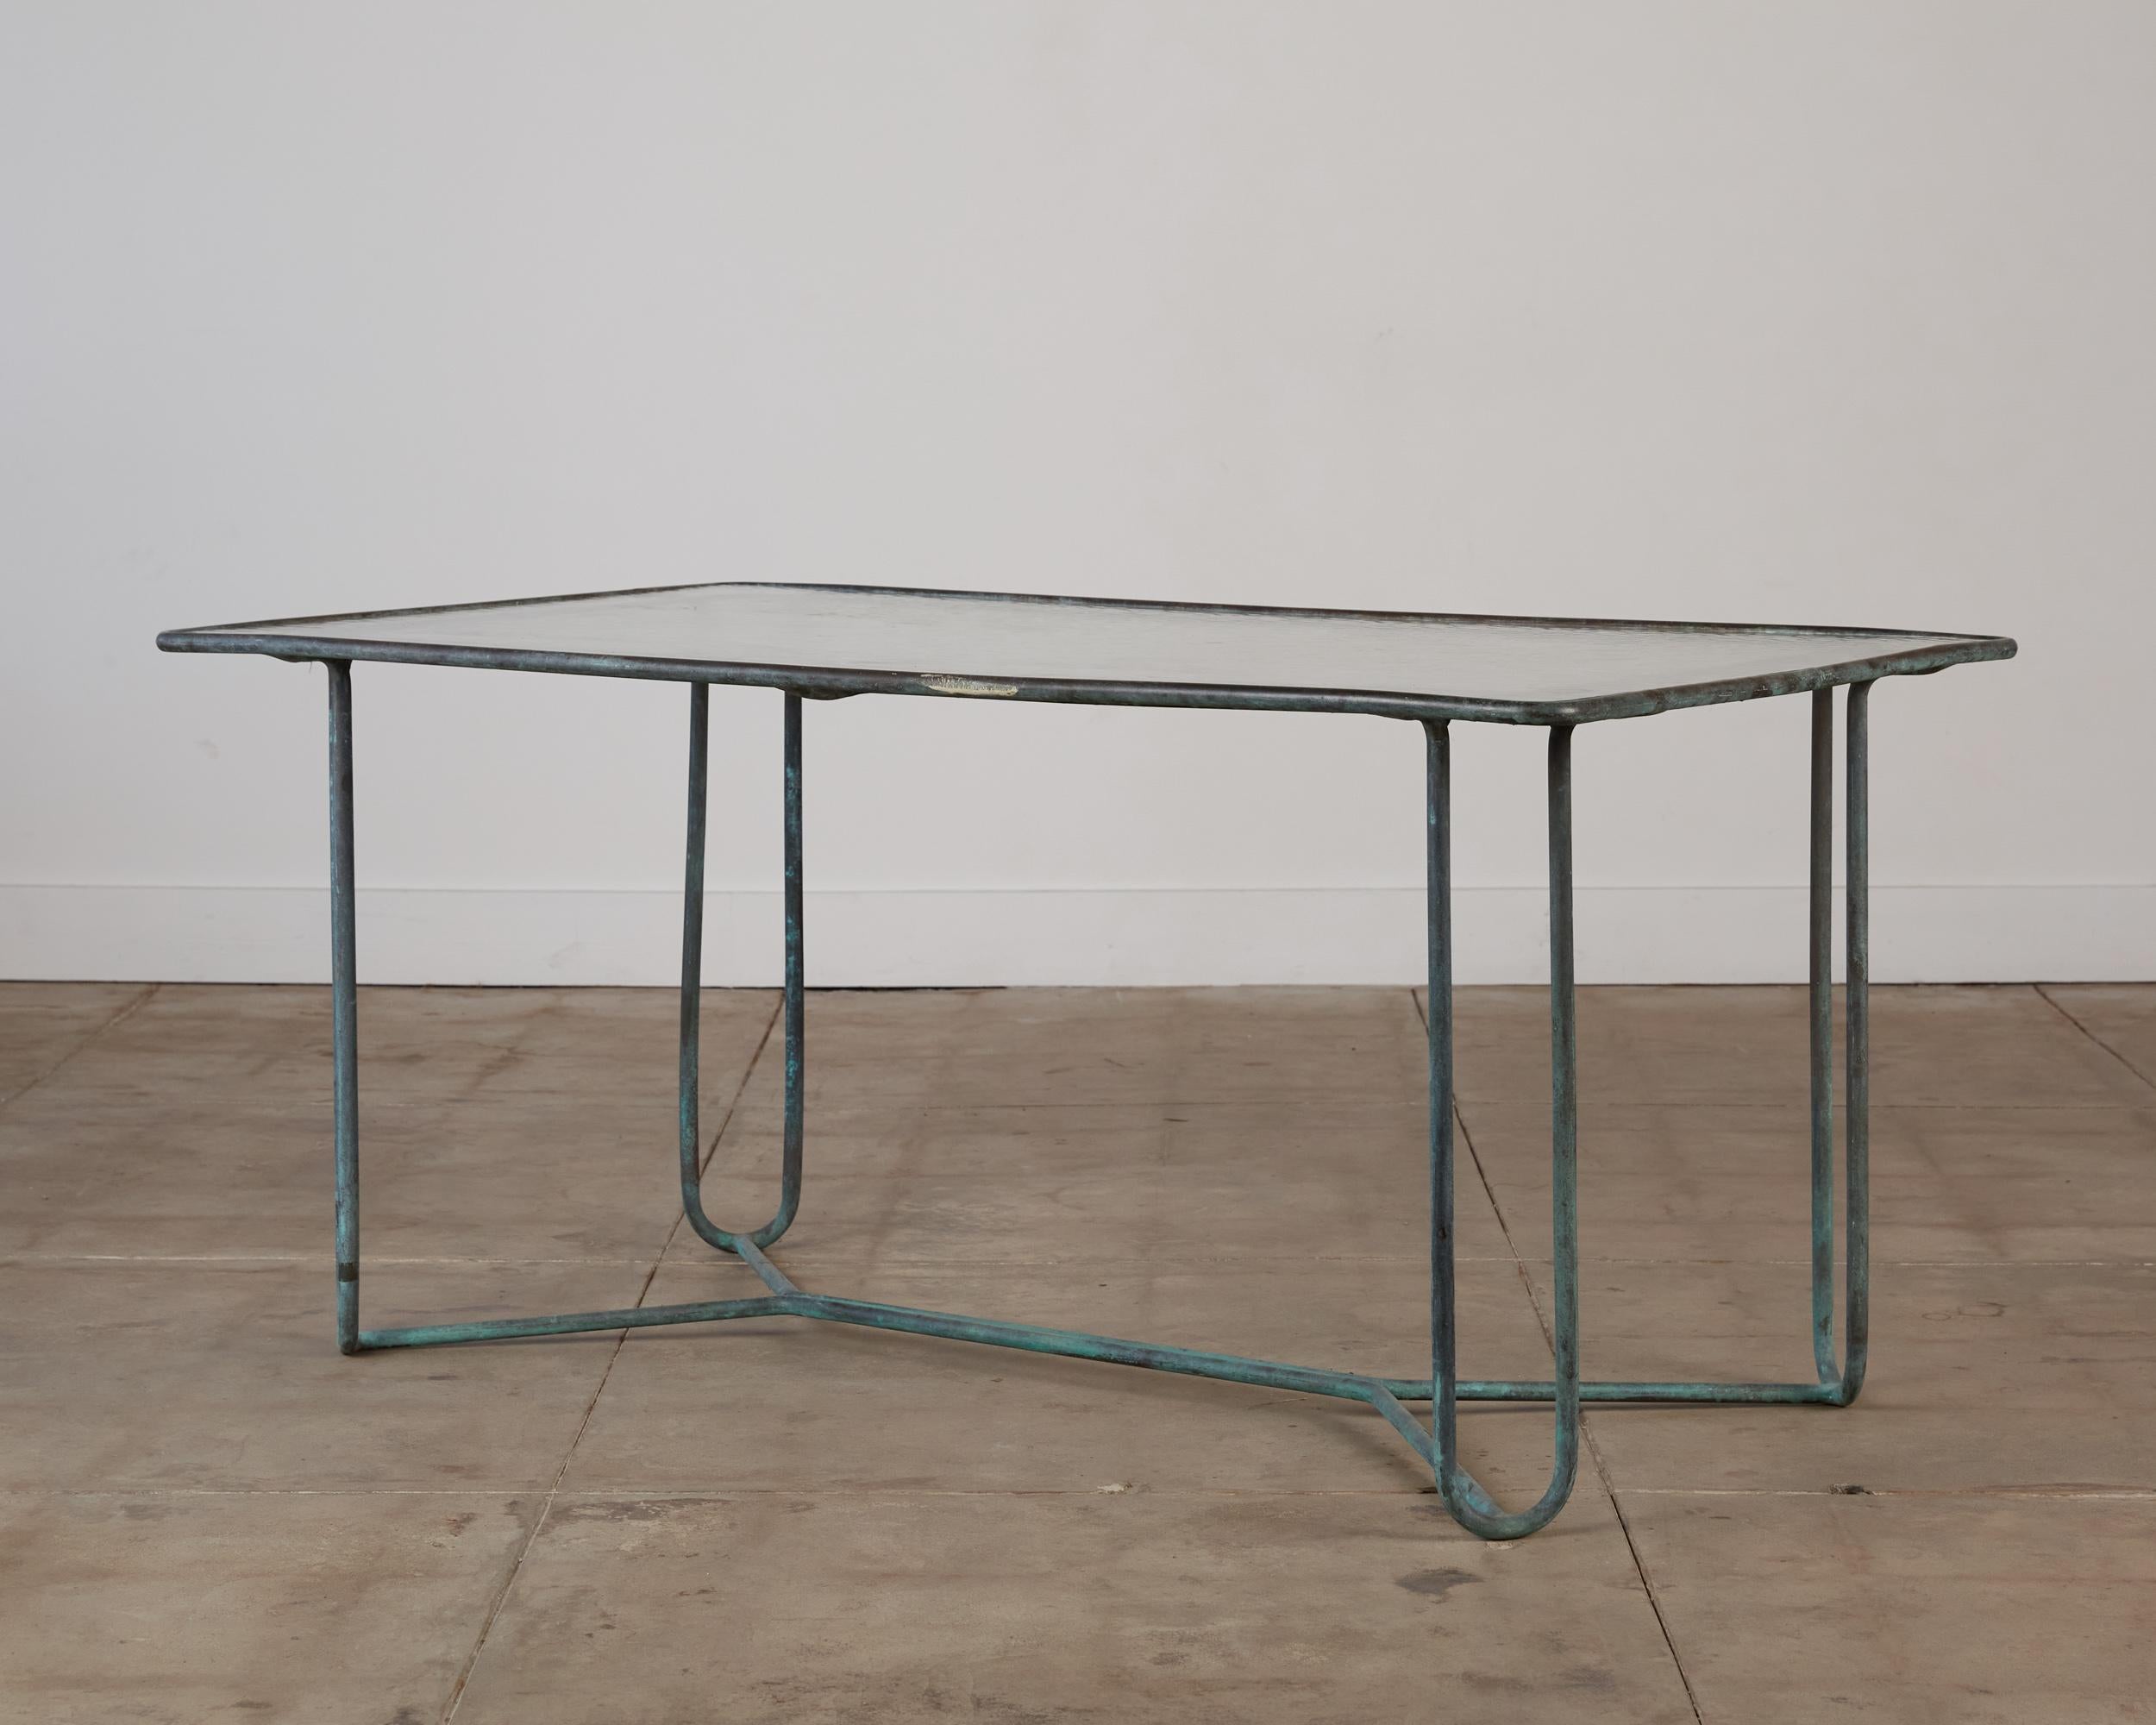 A dining table in patinated bronze designed by Walter Lamb and produced by Brown Jordan. The table has a rectangular shape with rounded corners, supported by four hairpin legs in matching bronze. The legs are joined by diagonal stretchers that sit